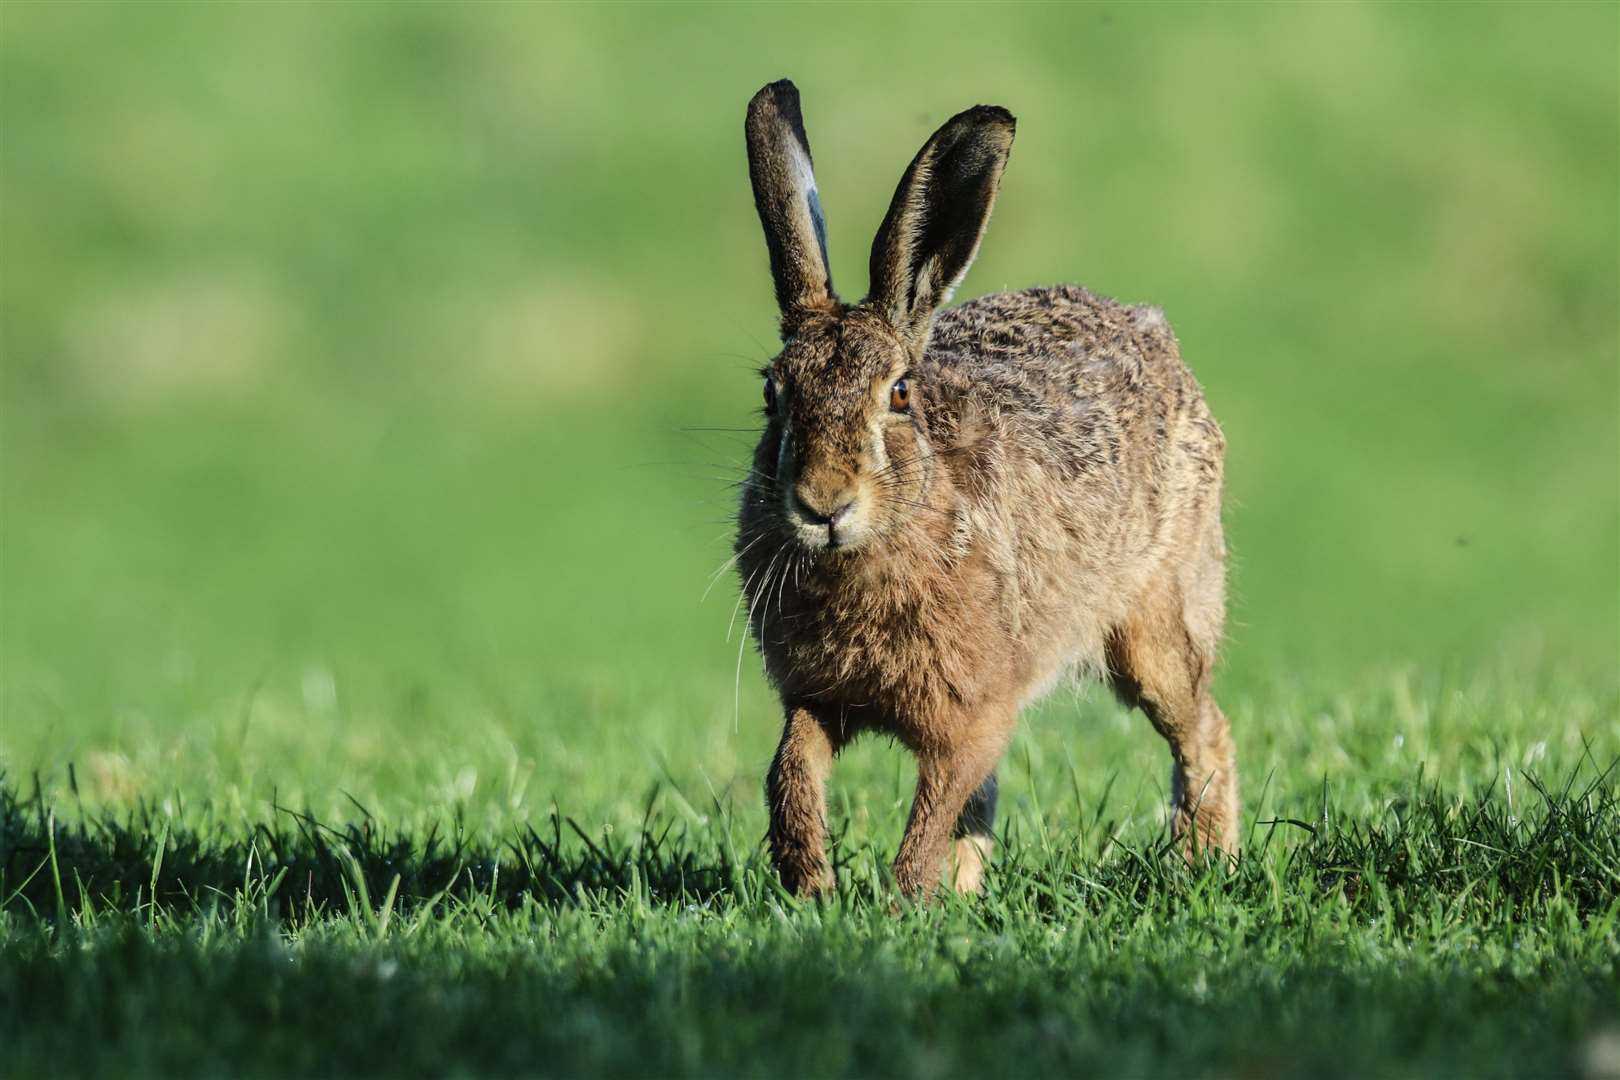 Incidents of hare coursing have been rising in the north-east